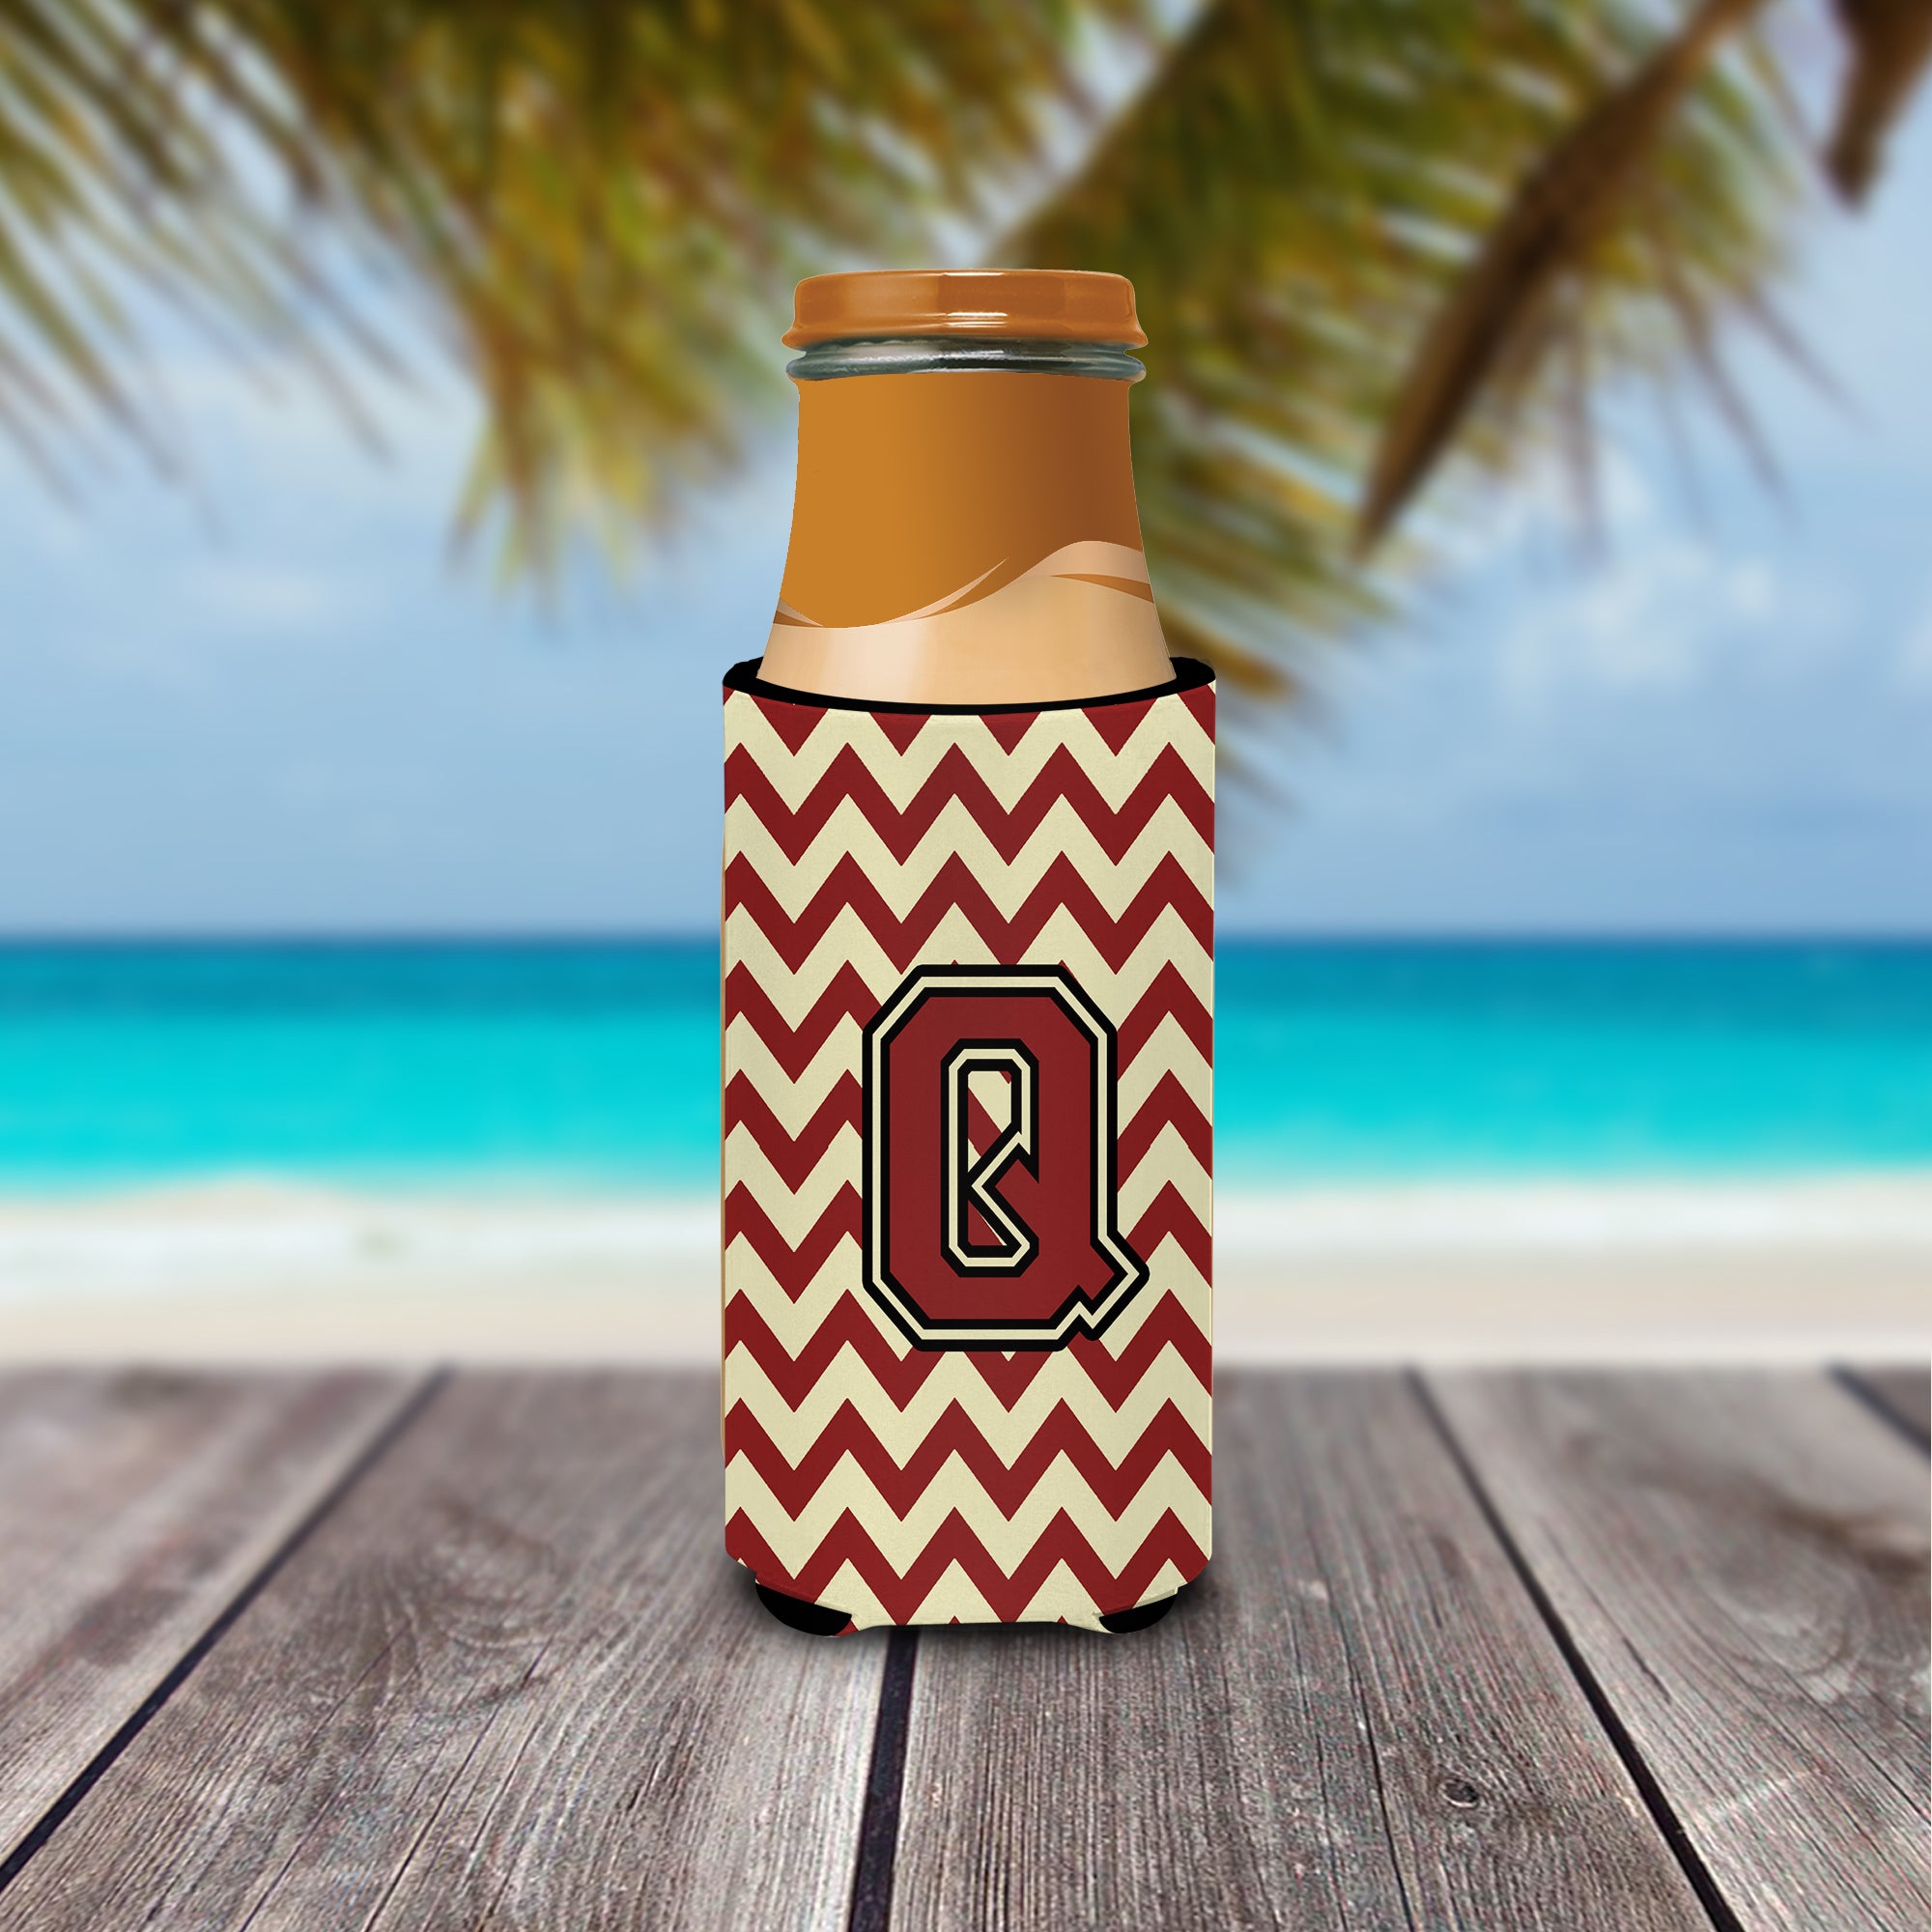 Letter Q Chevron Maroon and Gold Ultra Beverage Insulators for slim cans CJ1061-QMUK.